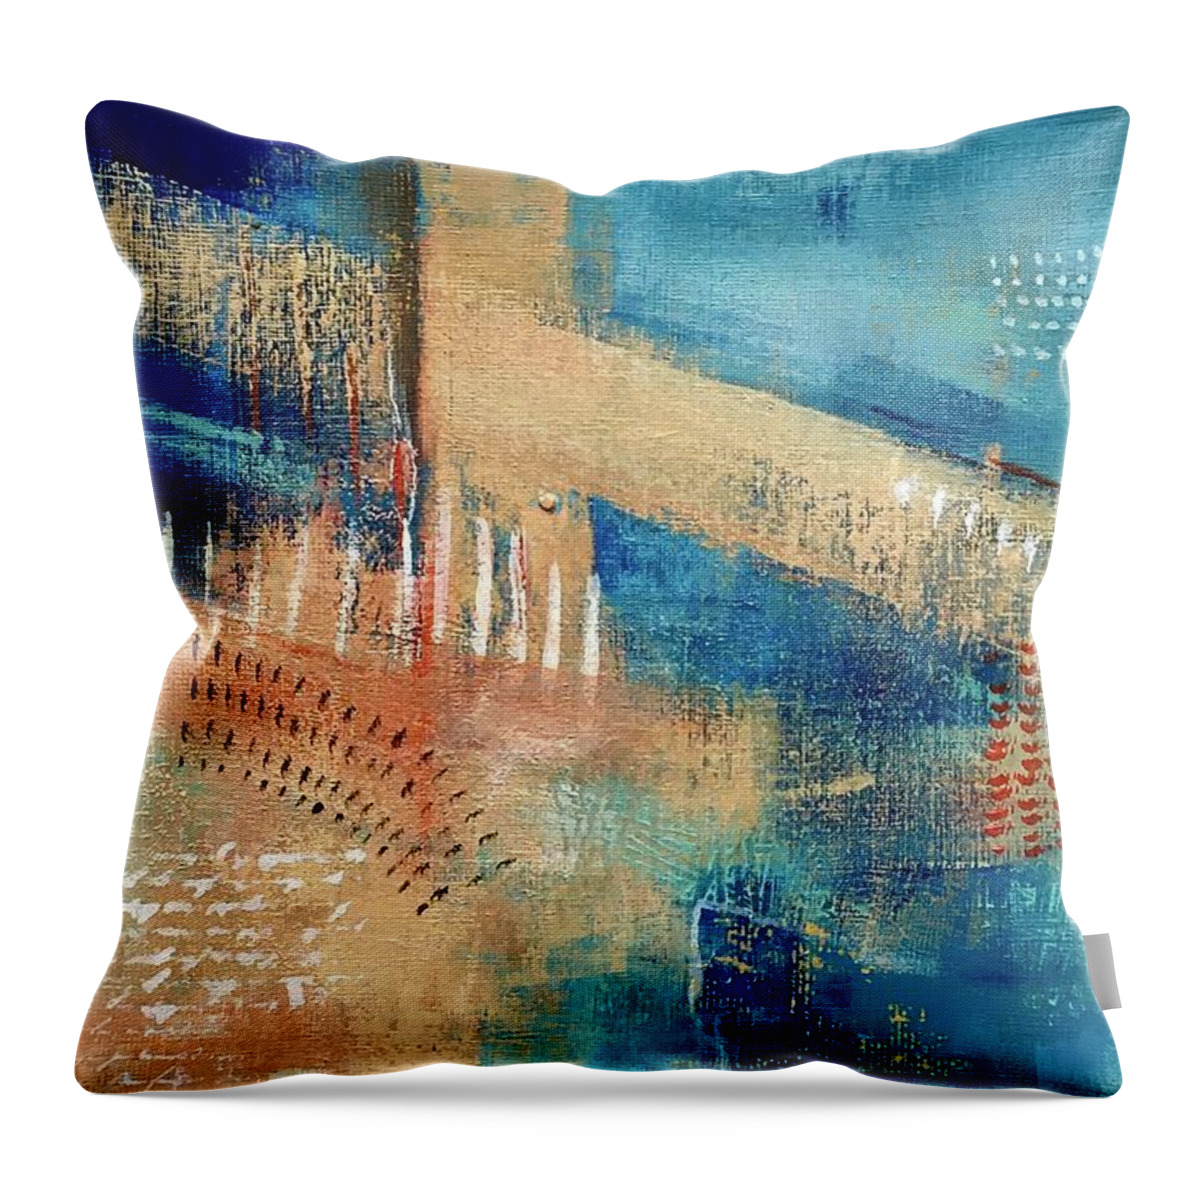 Acrylic Painting Throw Pillow featuring the painting Wonderment by Suzzanna Frank